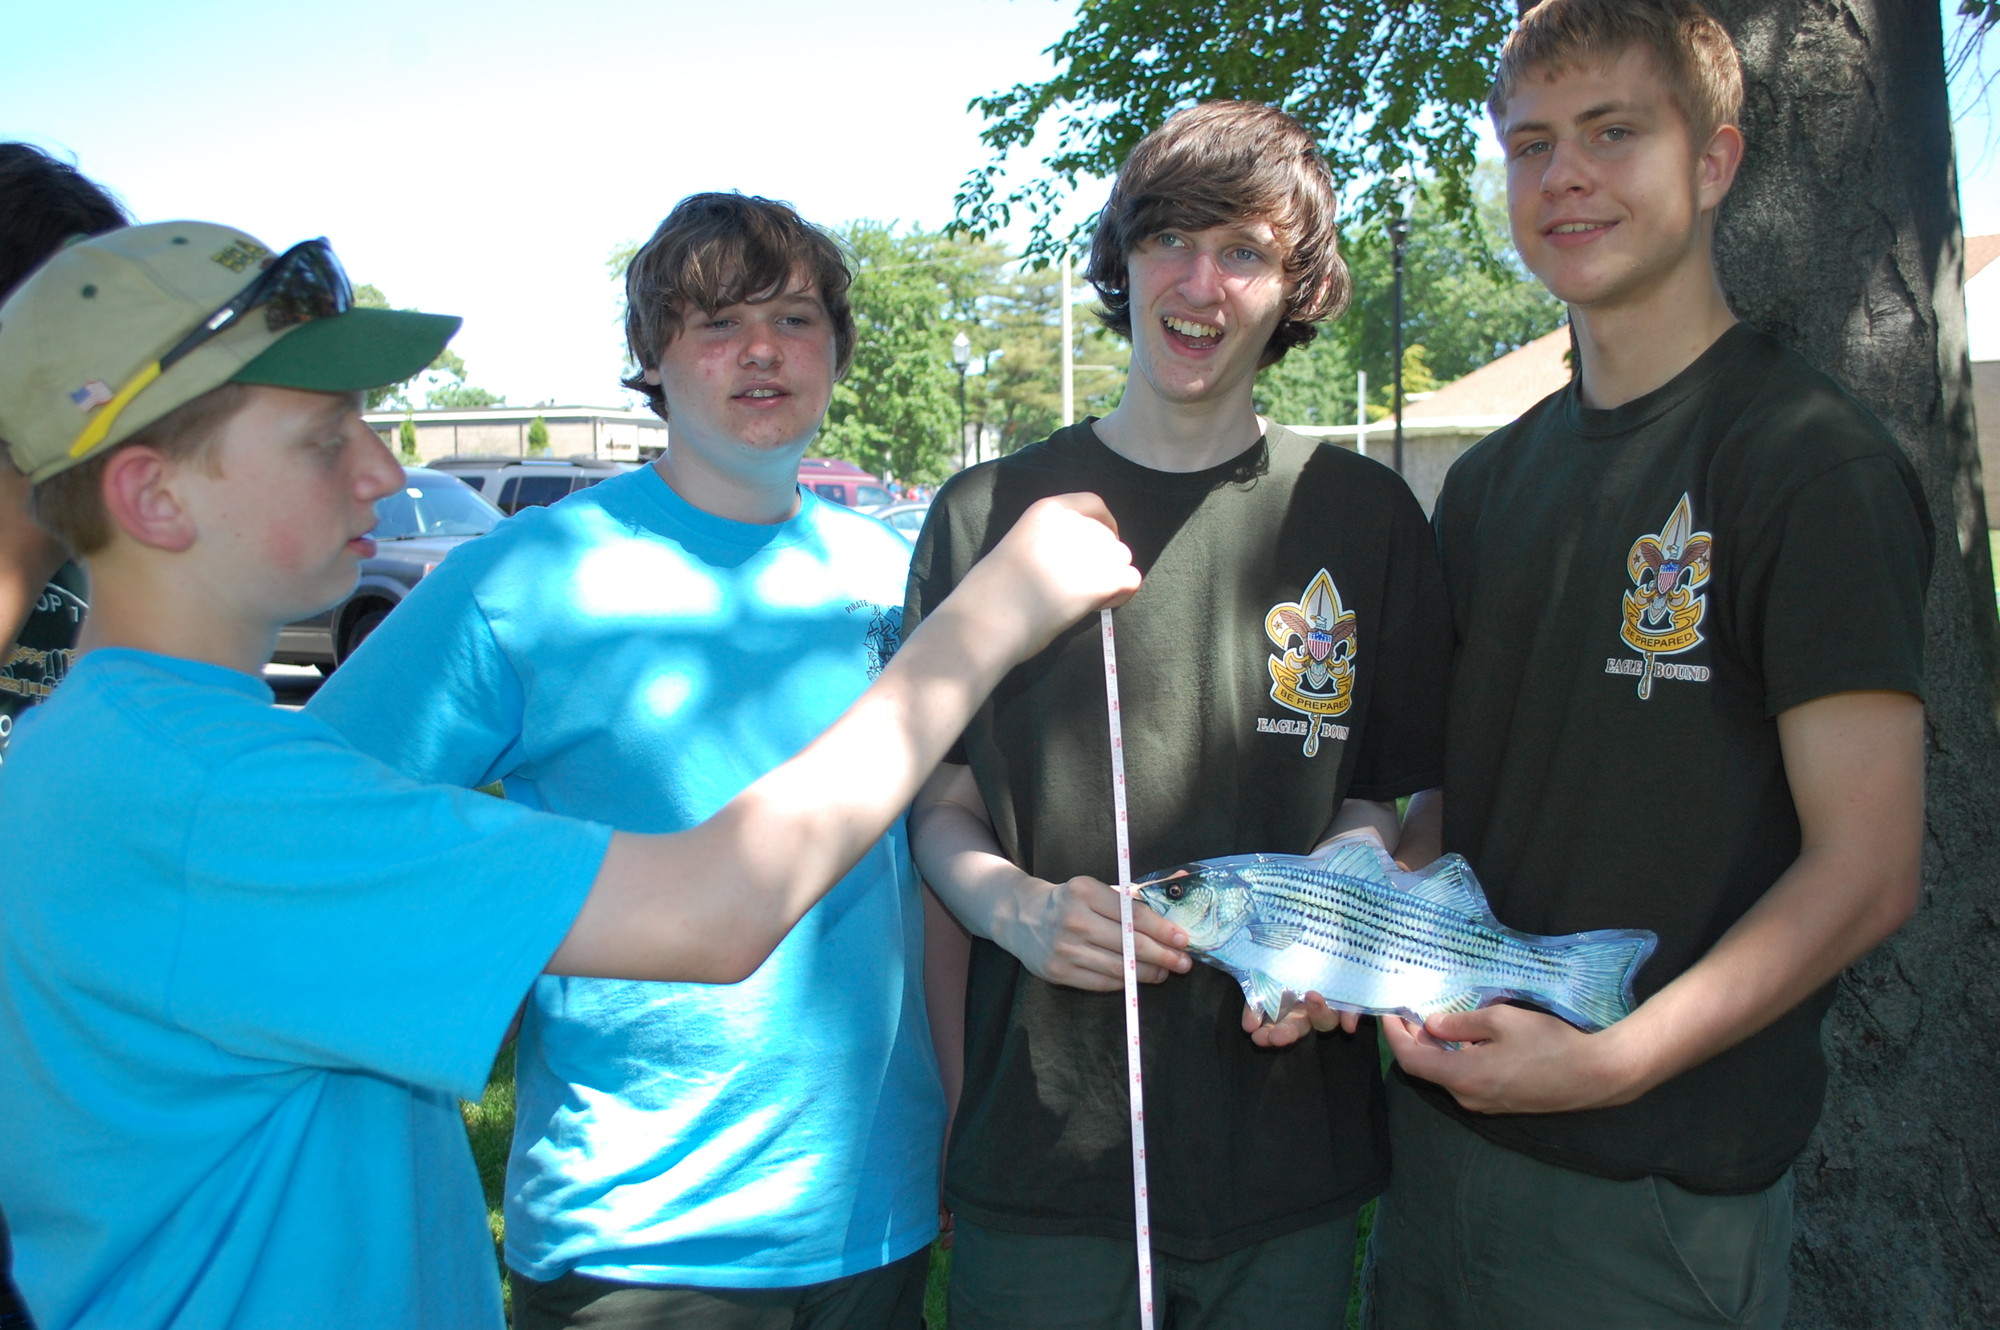 Troop 116 Boy Scouts, from left, Jason Bitteto, Chris Raffloer, Billy Raffloer and Ryan Plackis learned about fish.